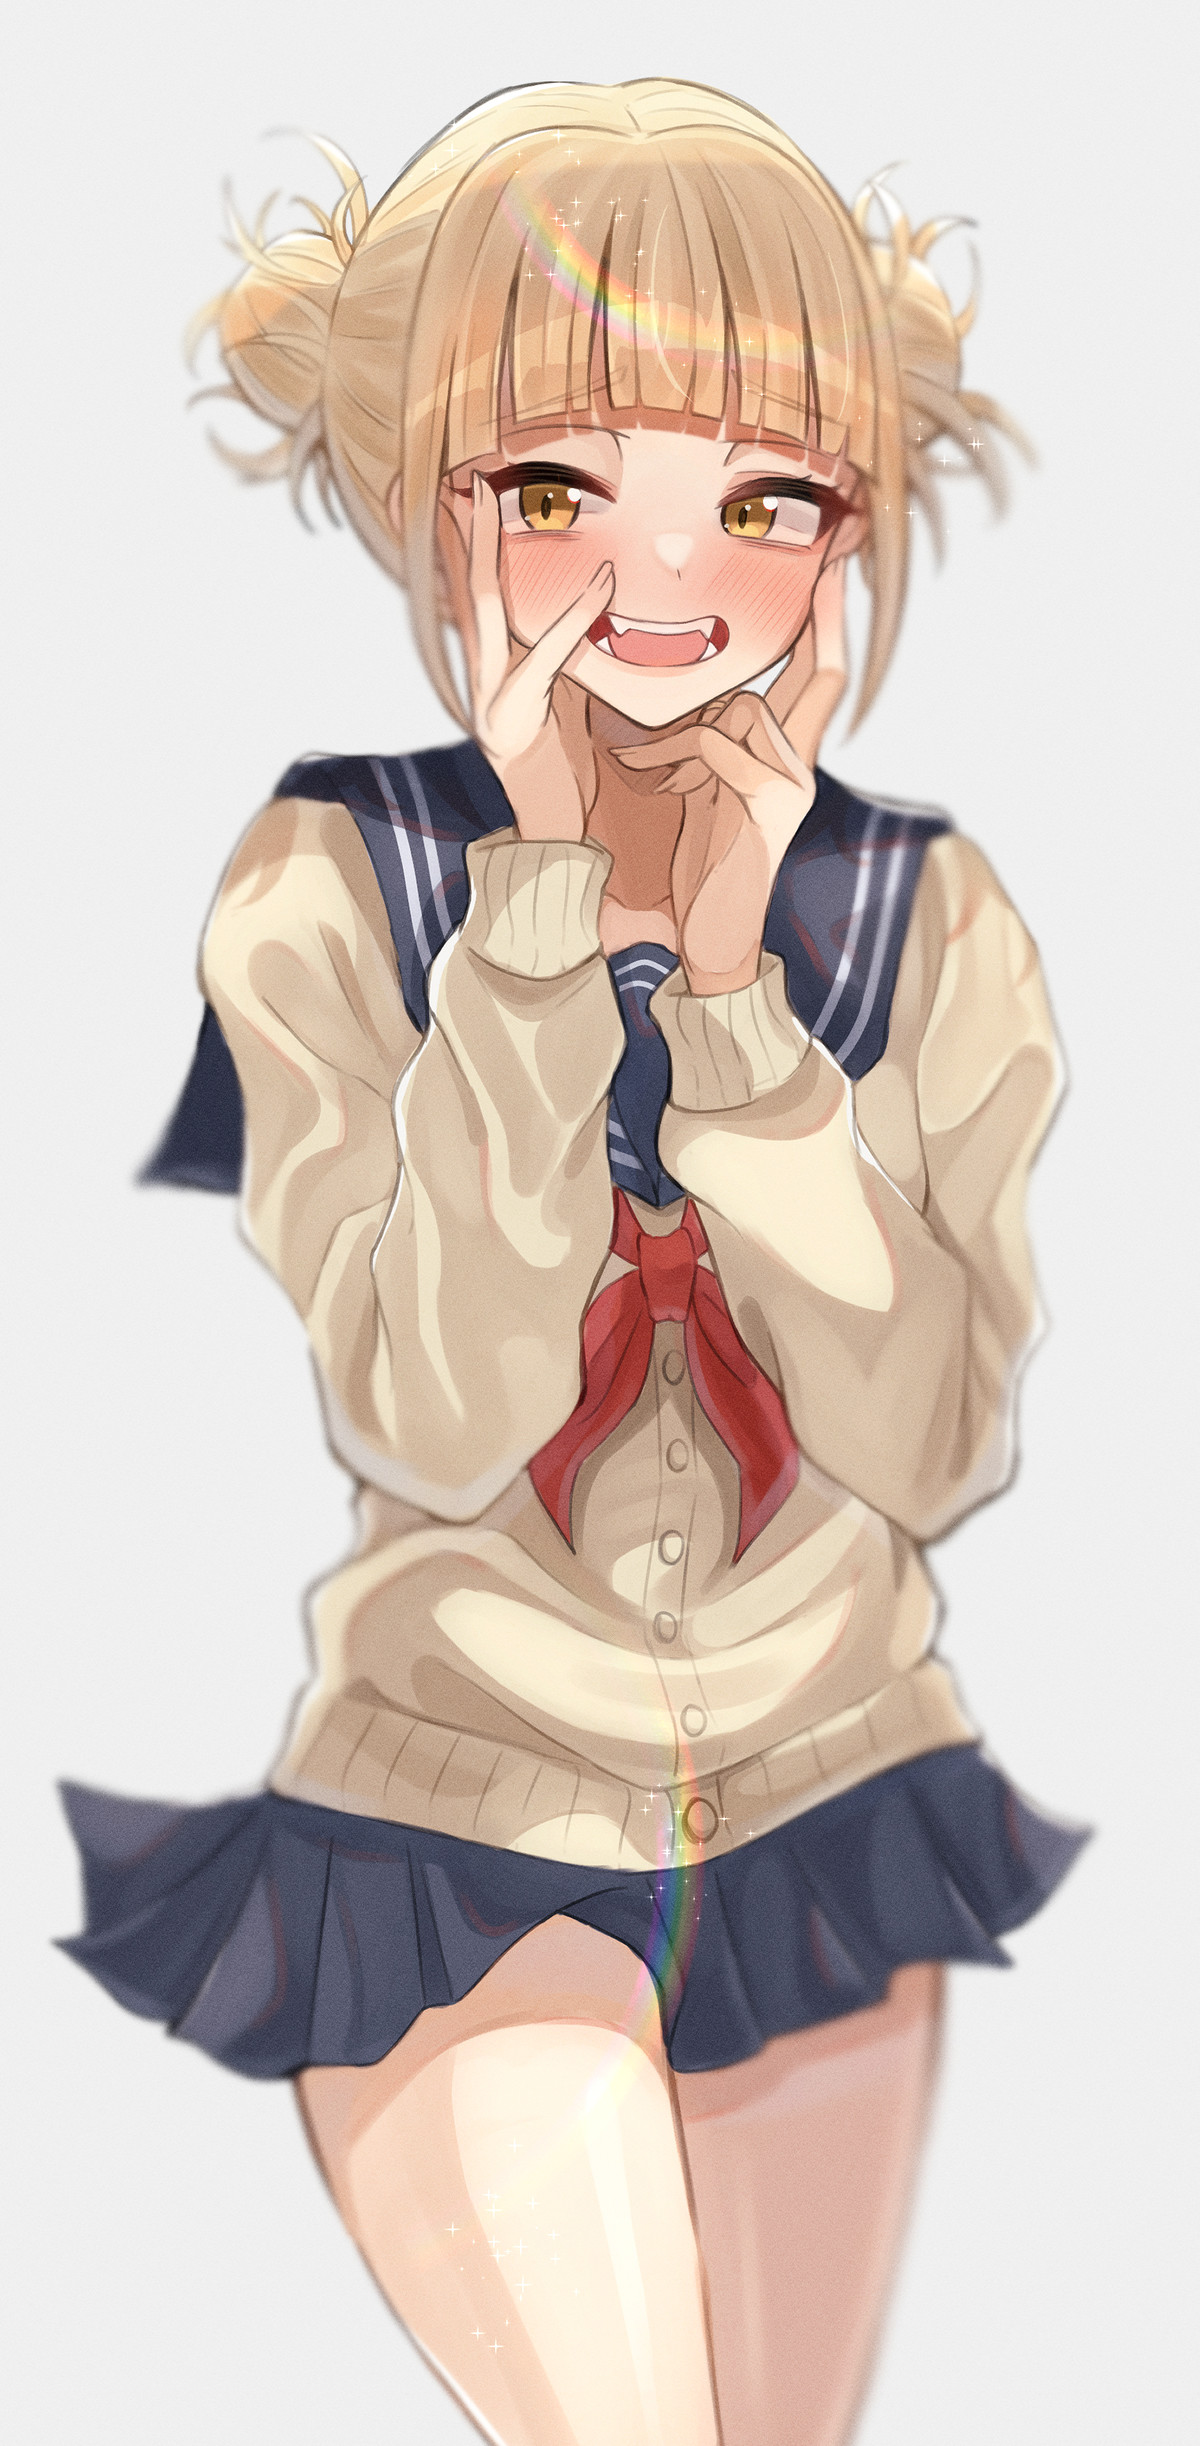 Daily Toga - 1026: Cute Toga. join list: DailyToga (476 subs)Mention History Source: .. 